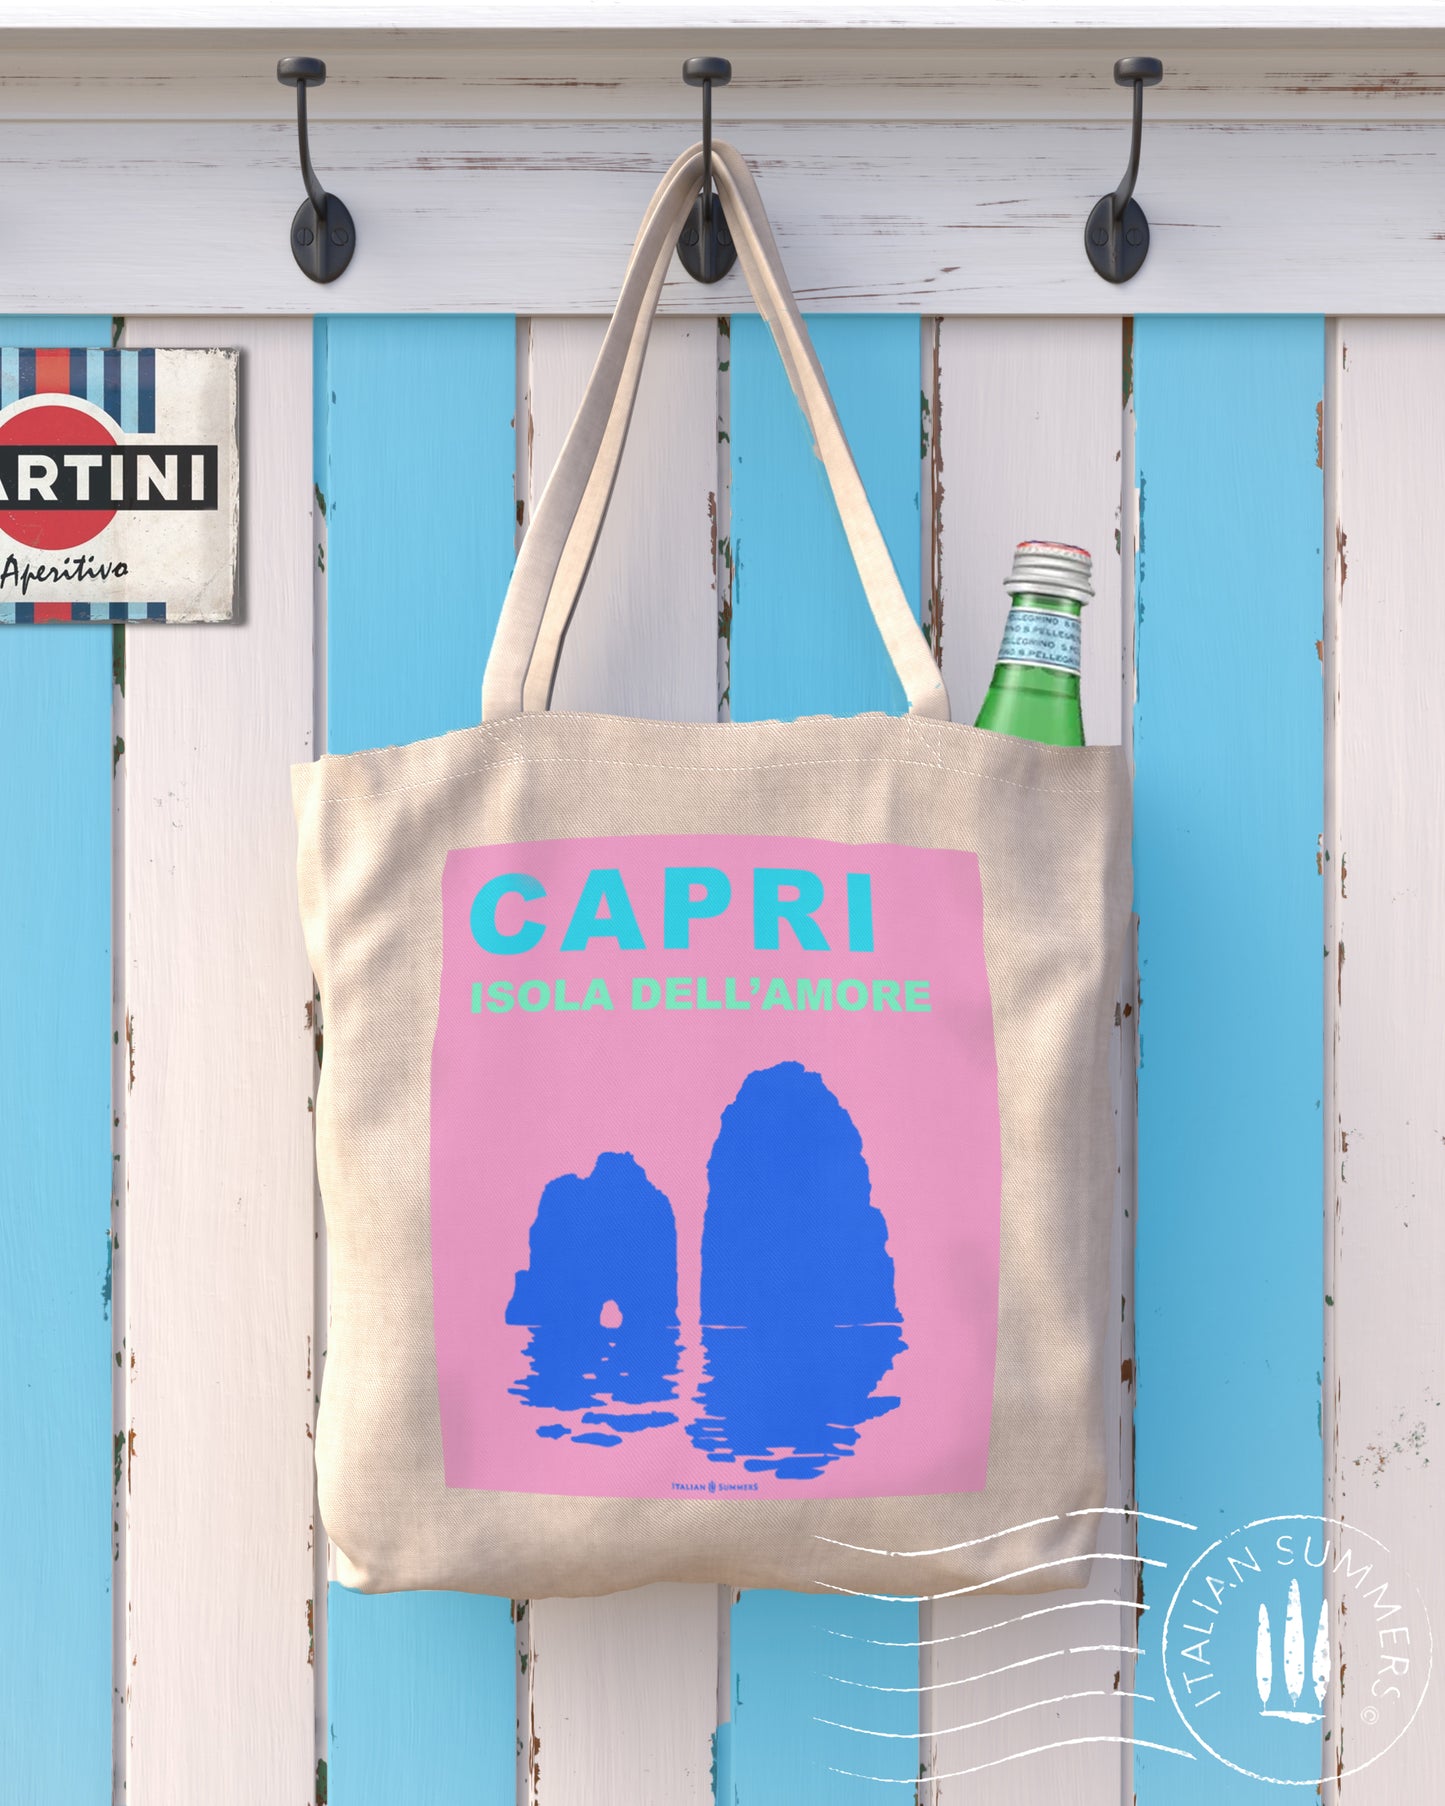 Tote Bag CAPRI ISOLA Dell' AMORE  by Italian Summers